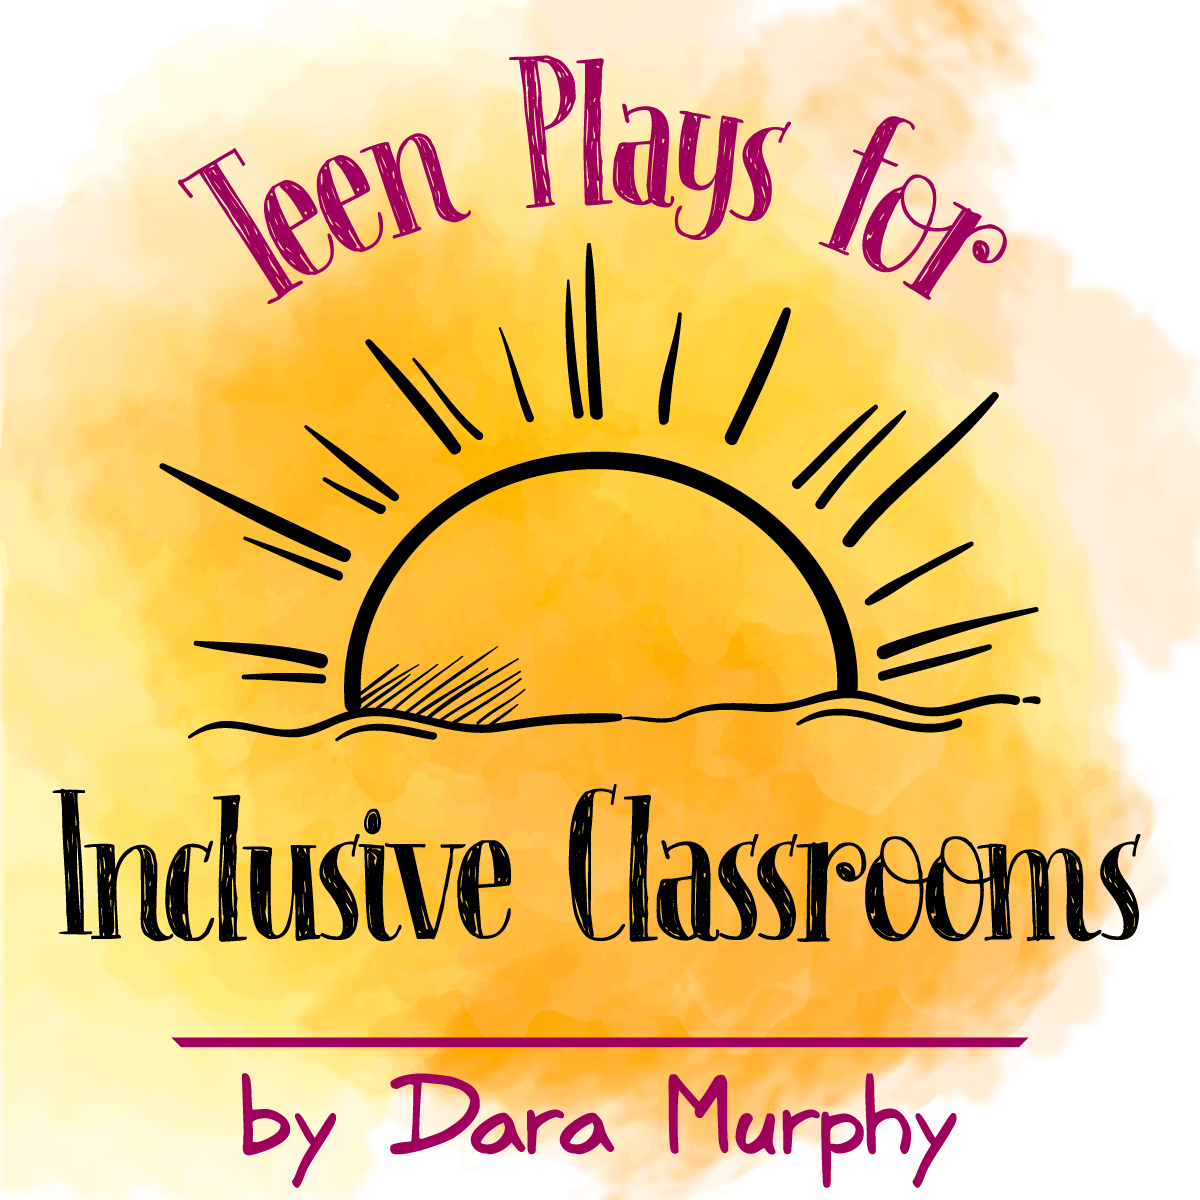 Teen Plays for Inclusive Classrooms